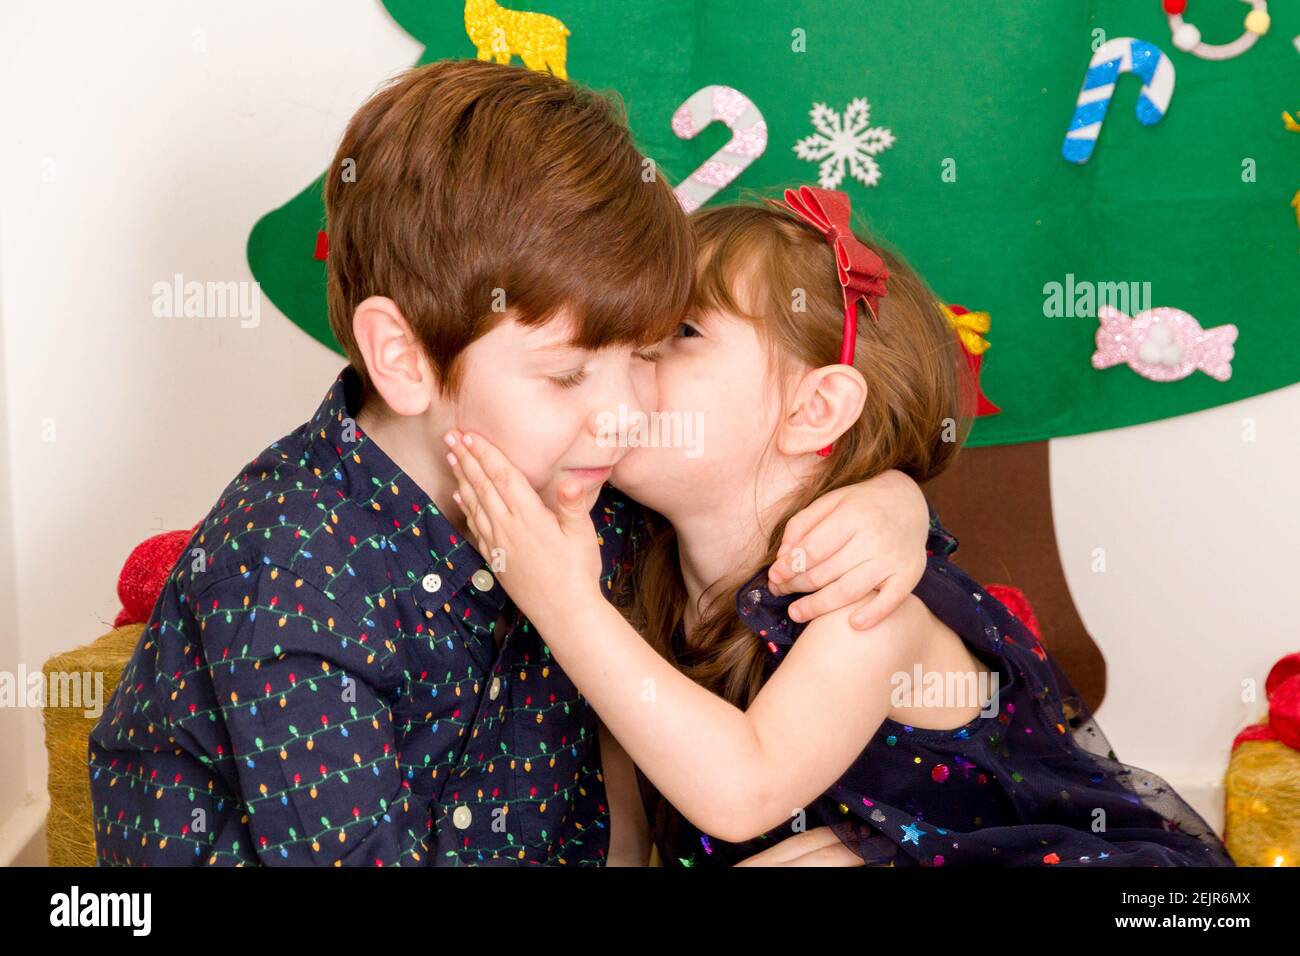 A cute, brown-haired, blue-eyed baby girl and a cute, red-haired, blue-eyed boy smartly dressed kissing on front of a Christmas tree Stock Photo